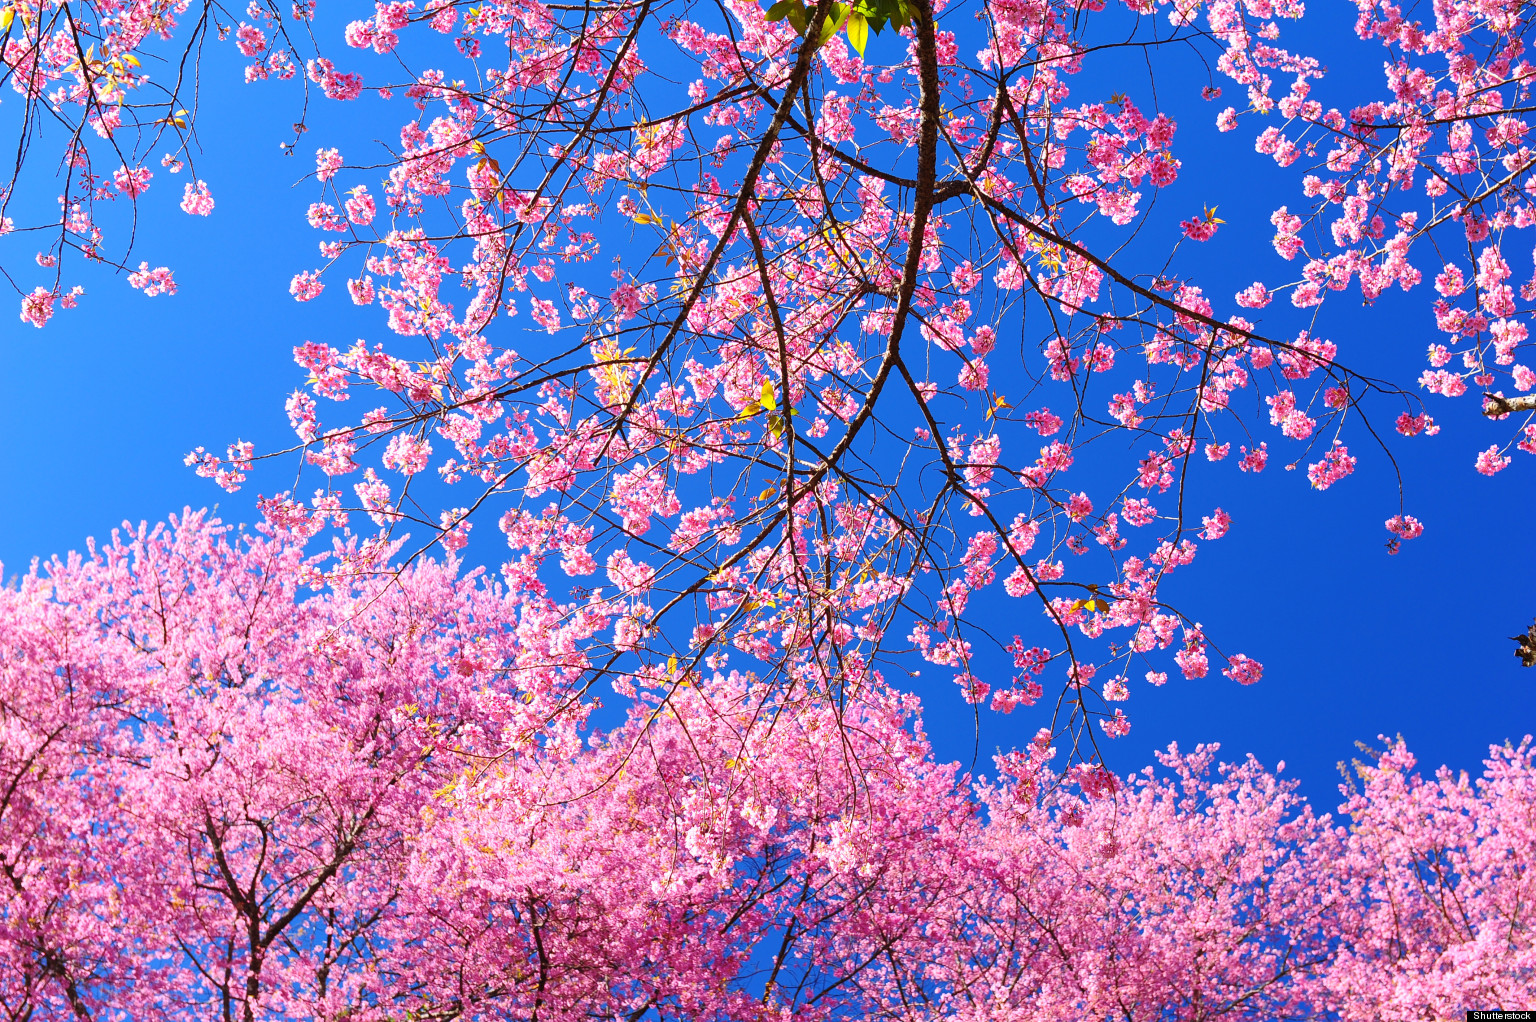 How to 'Cherry Blossom' Like a Japanese | HuffPost